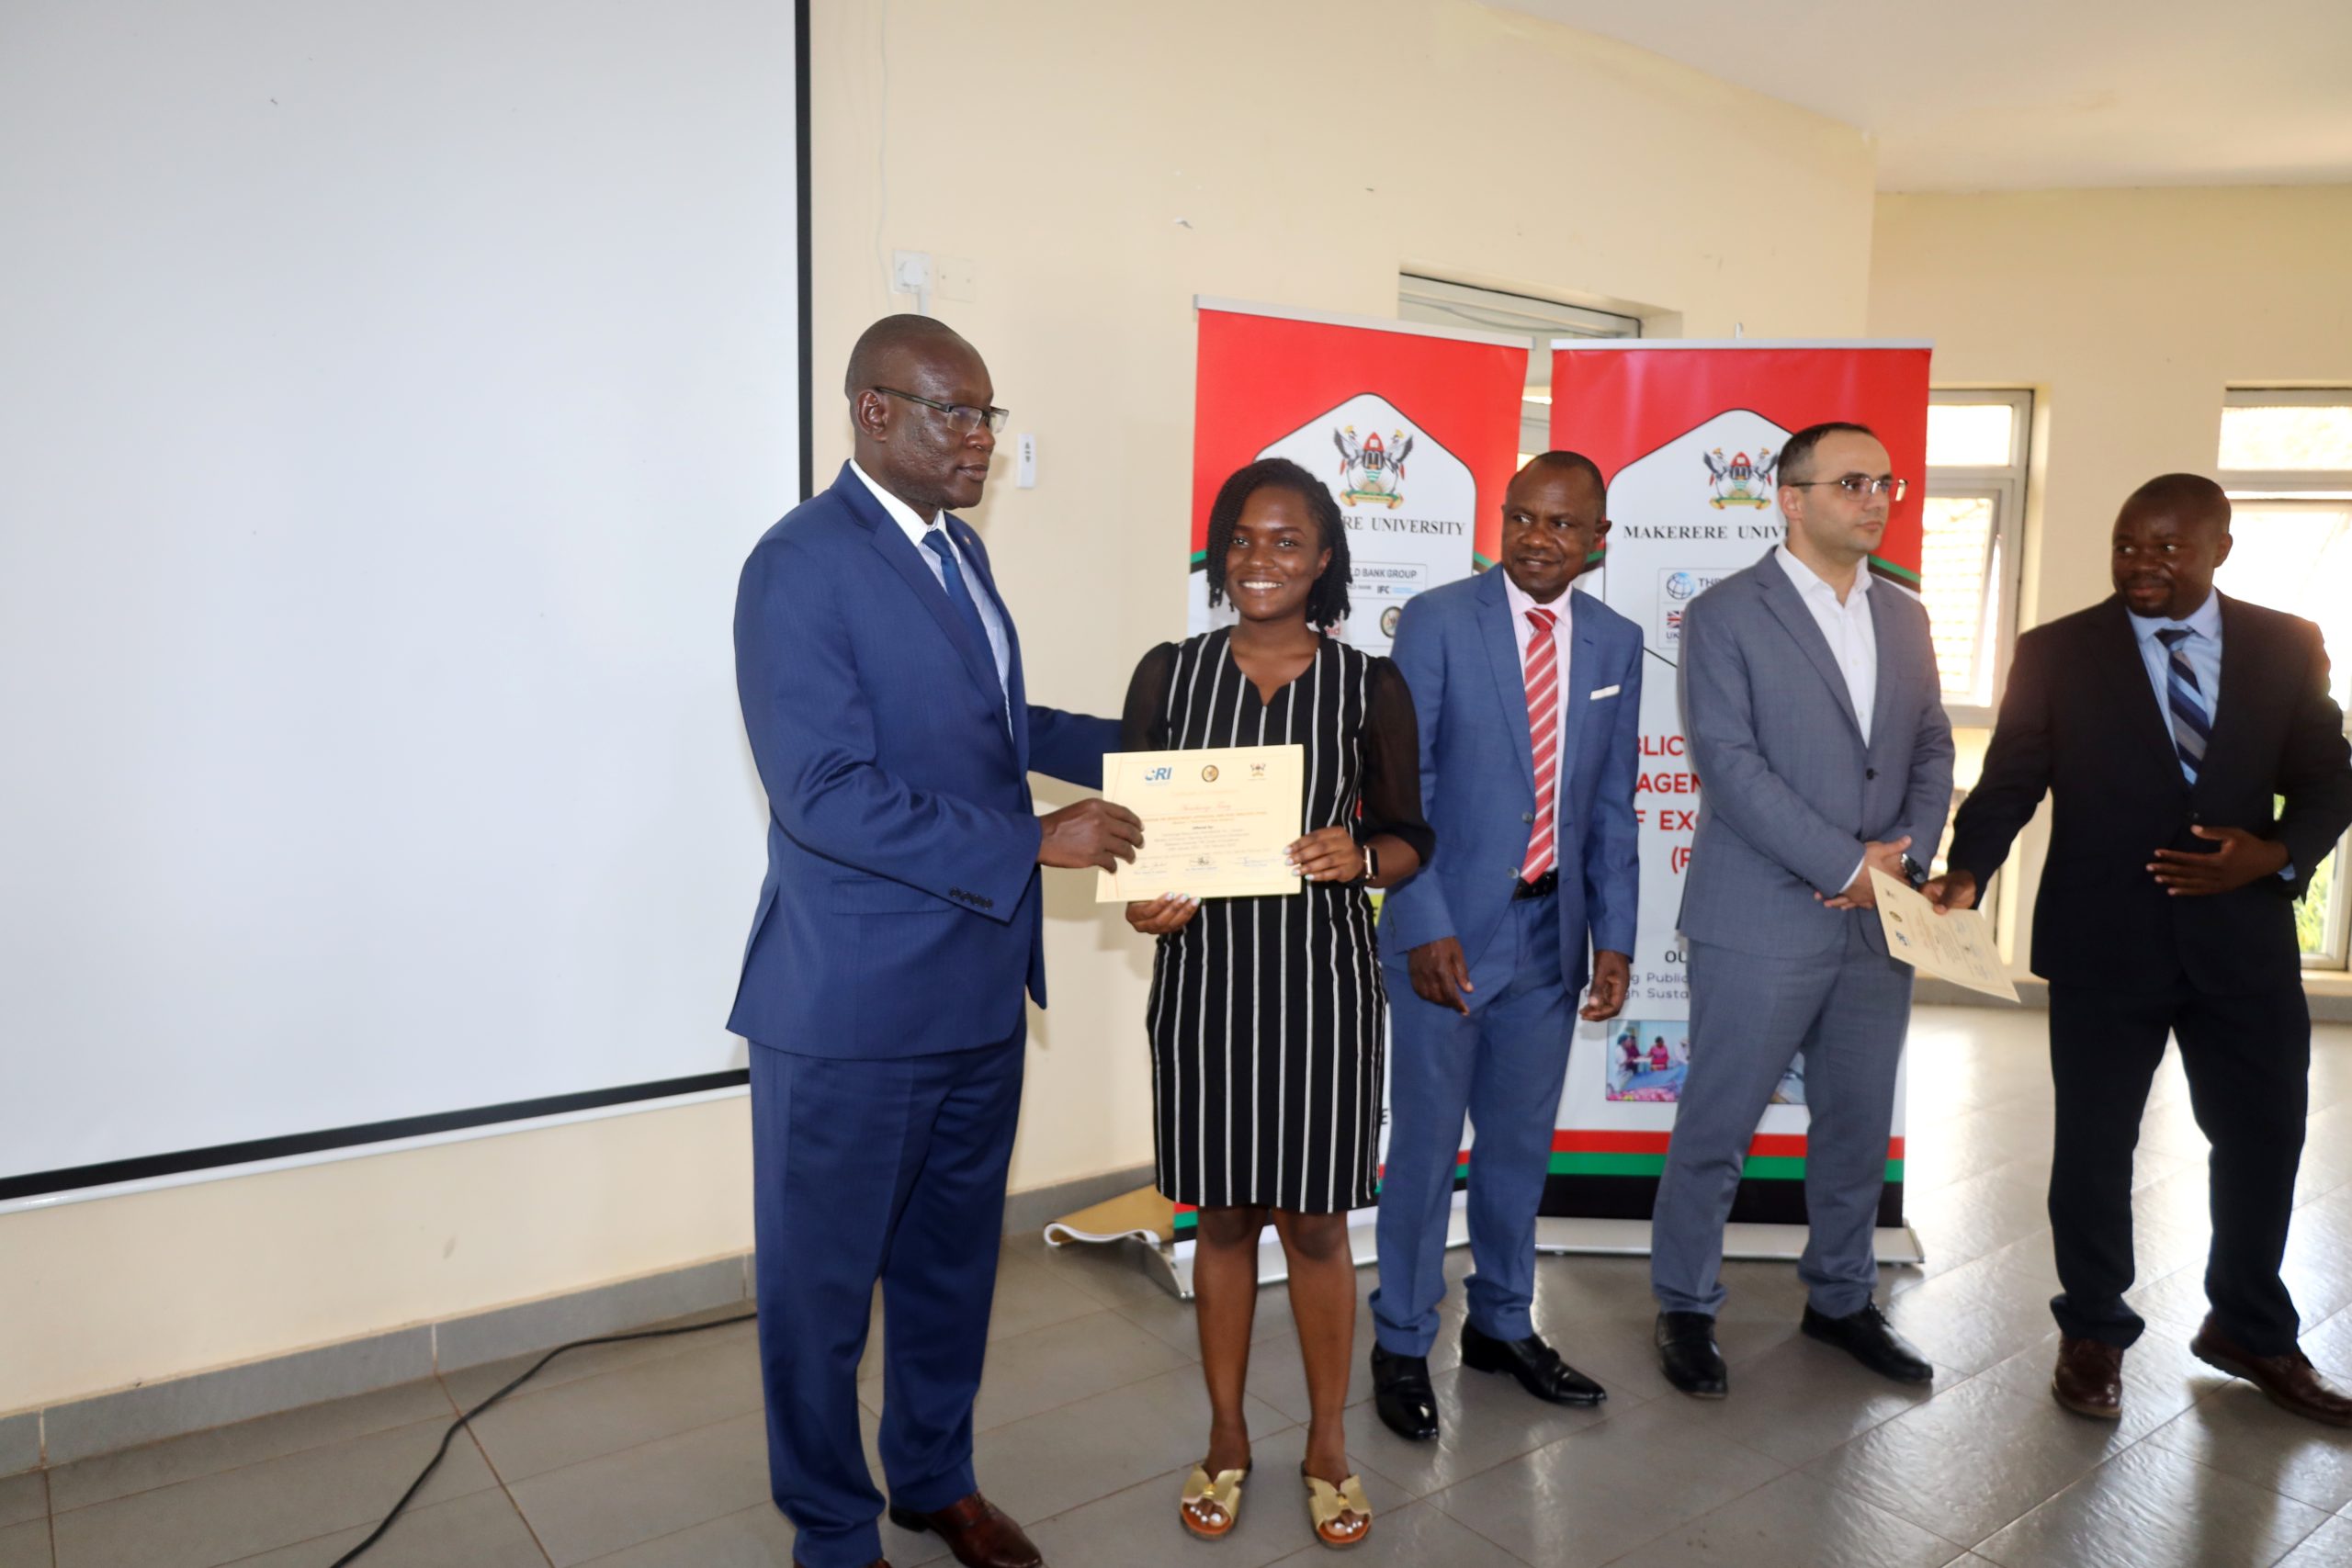 Mr. Ashaba Hannington (L), who represented the Permanent Secretary of MoFPED presents a certificate to one of the participants as the Principal CoBAMS, Prof. Eria Hisali (C), Dean of the School of Economics, Prof. Ibrahim Okumu (R) and another official witness on 10th February 2023.